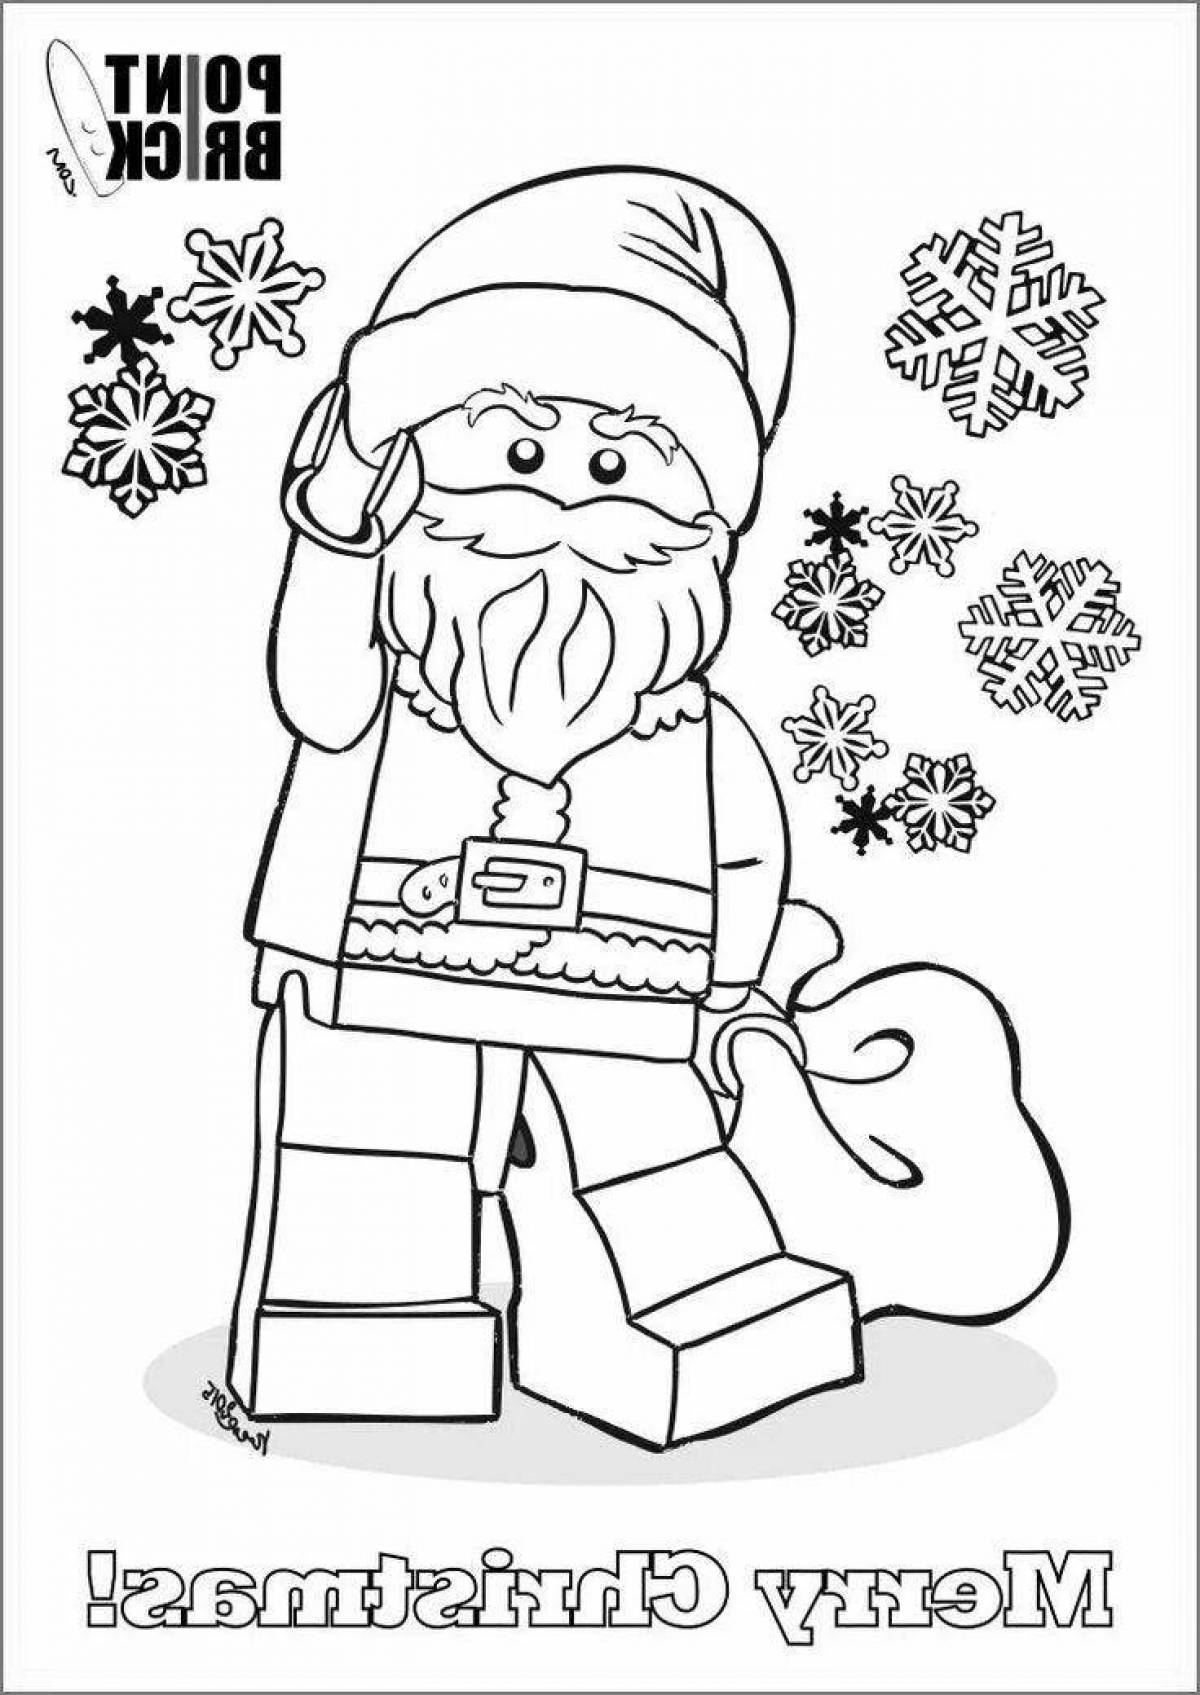 Gorgeous minecraft Christmas coloring